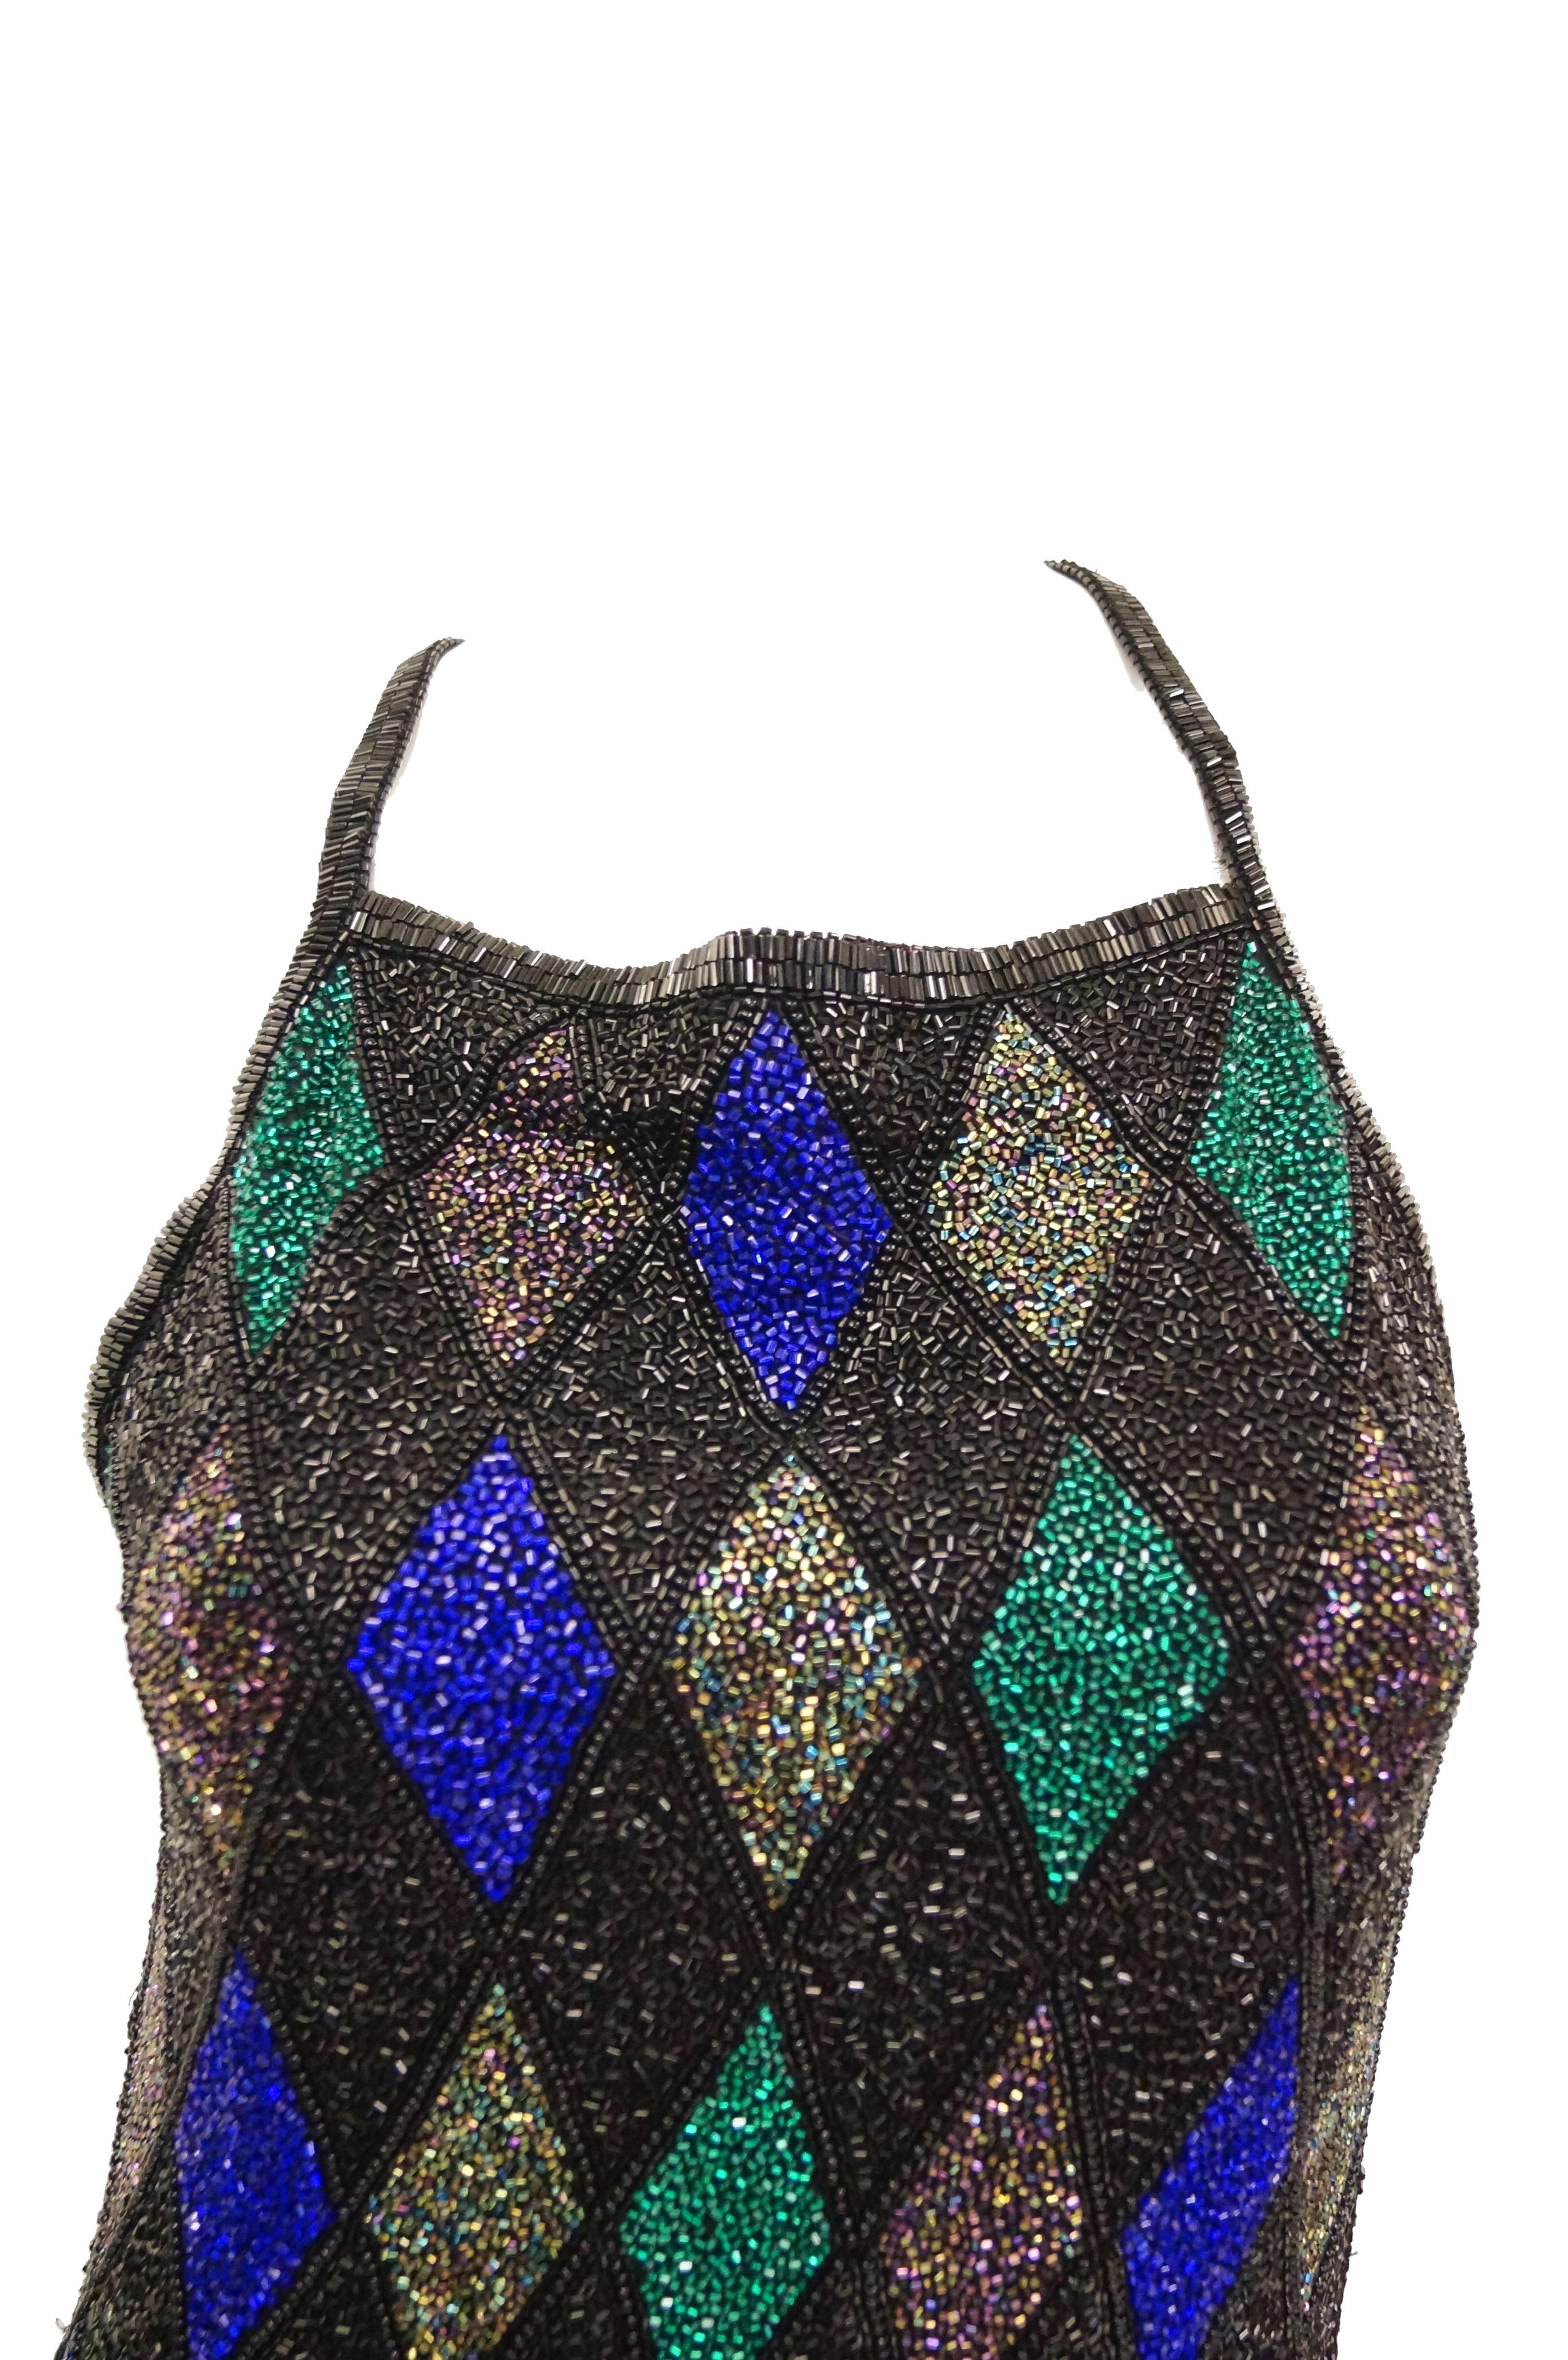 This dress hits mid thigh, has a halter neckline with criss - cross straps connecting to a plunging, low - cut back. The dress is meticulously beaded in a diamond pattern, with cobalt blue, lime green, and dark mauve beads between shimmering black